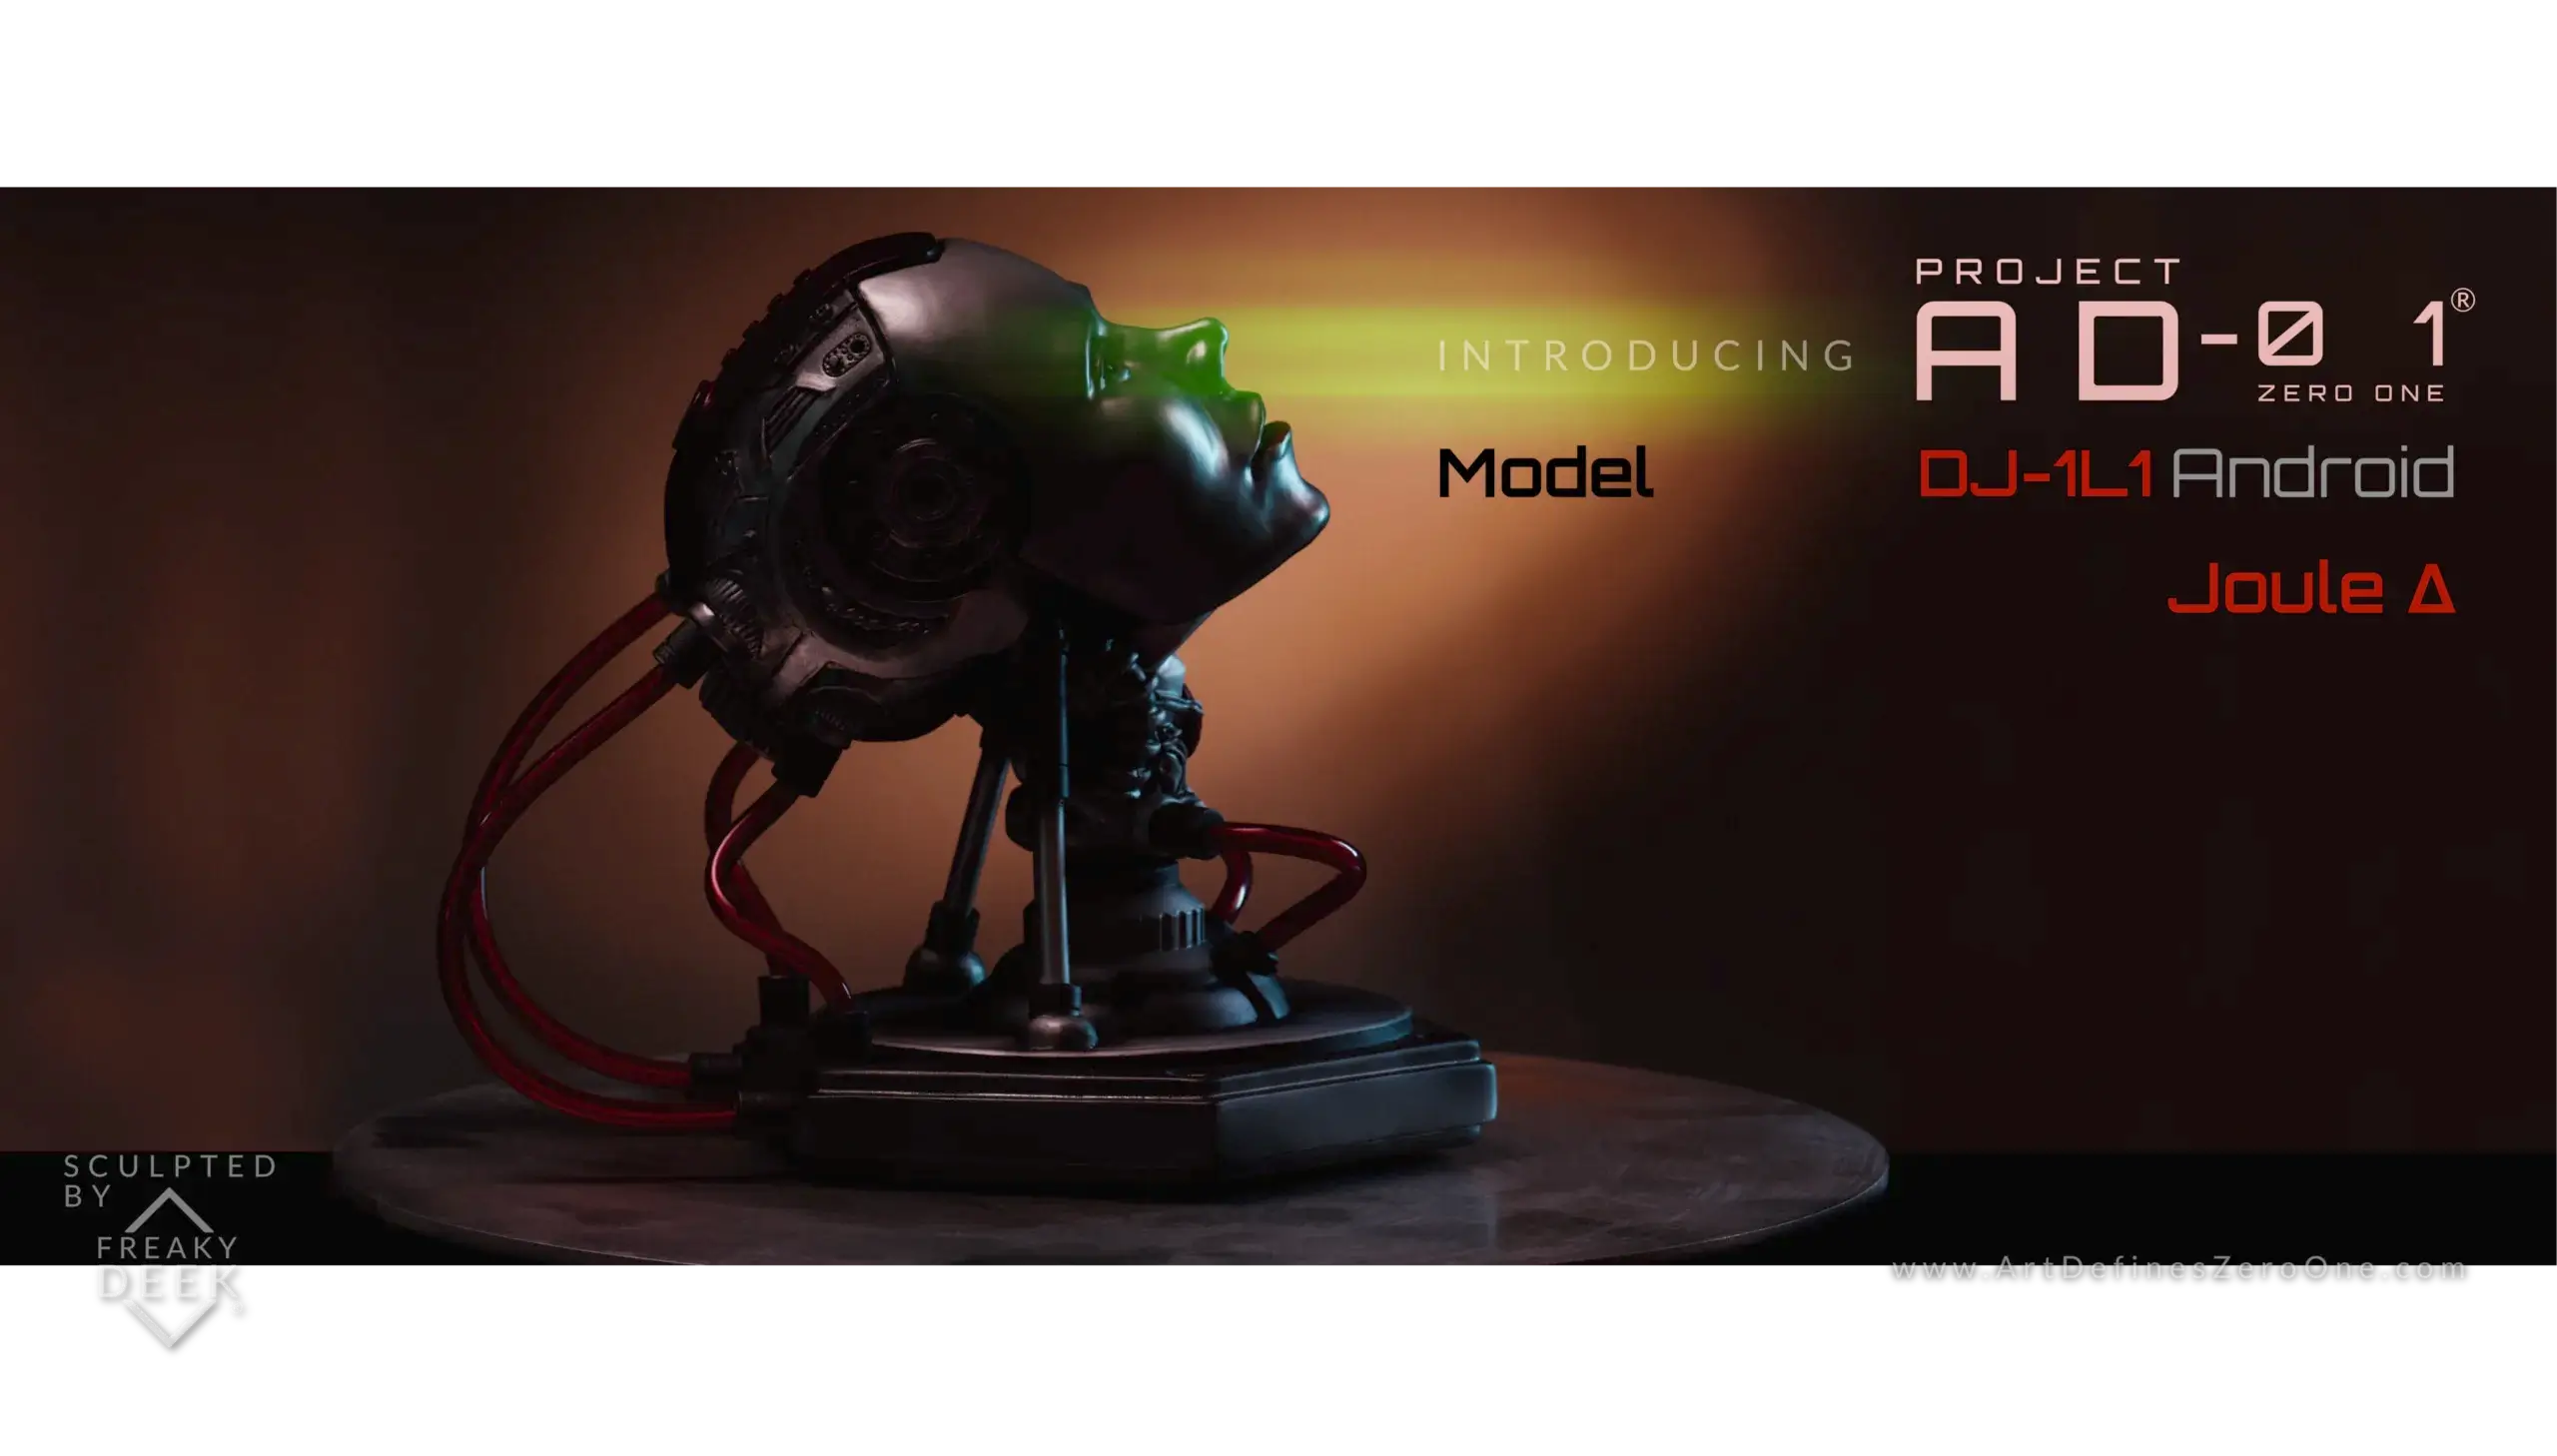 Project AD-01 handmade android red sculpture Joule side view